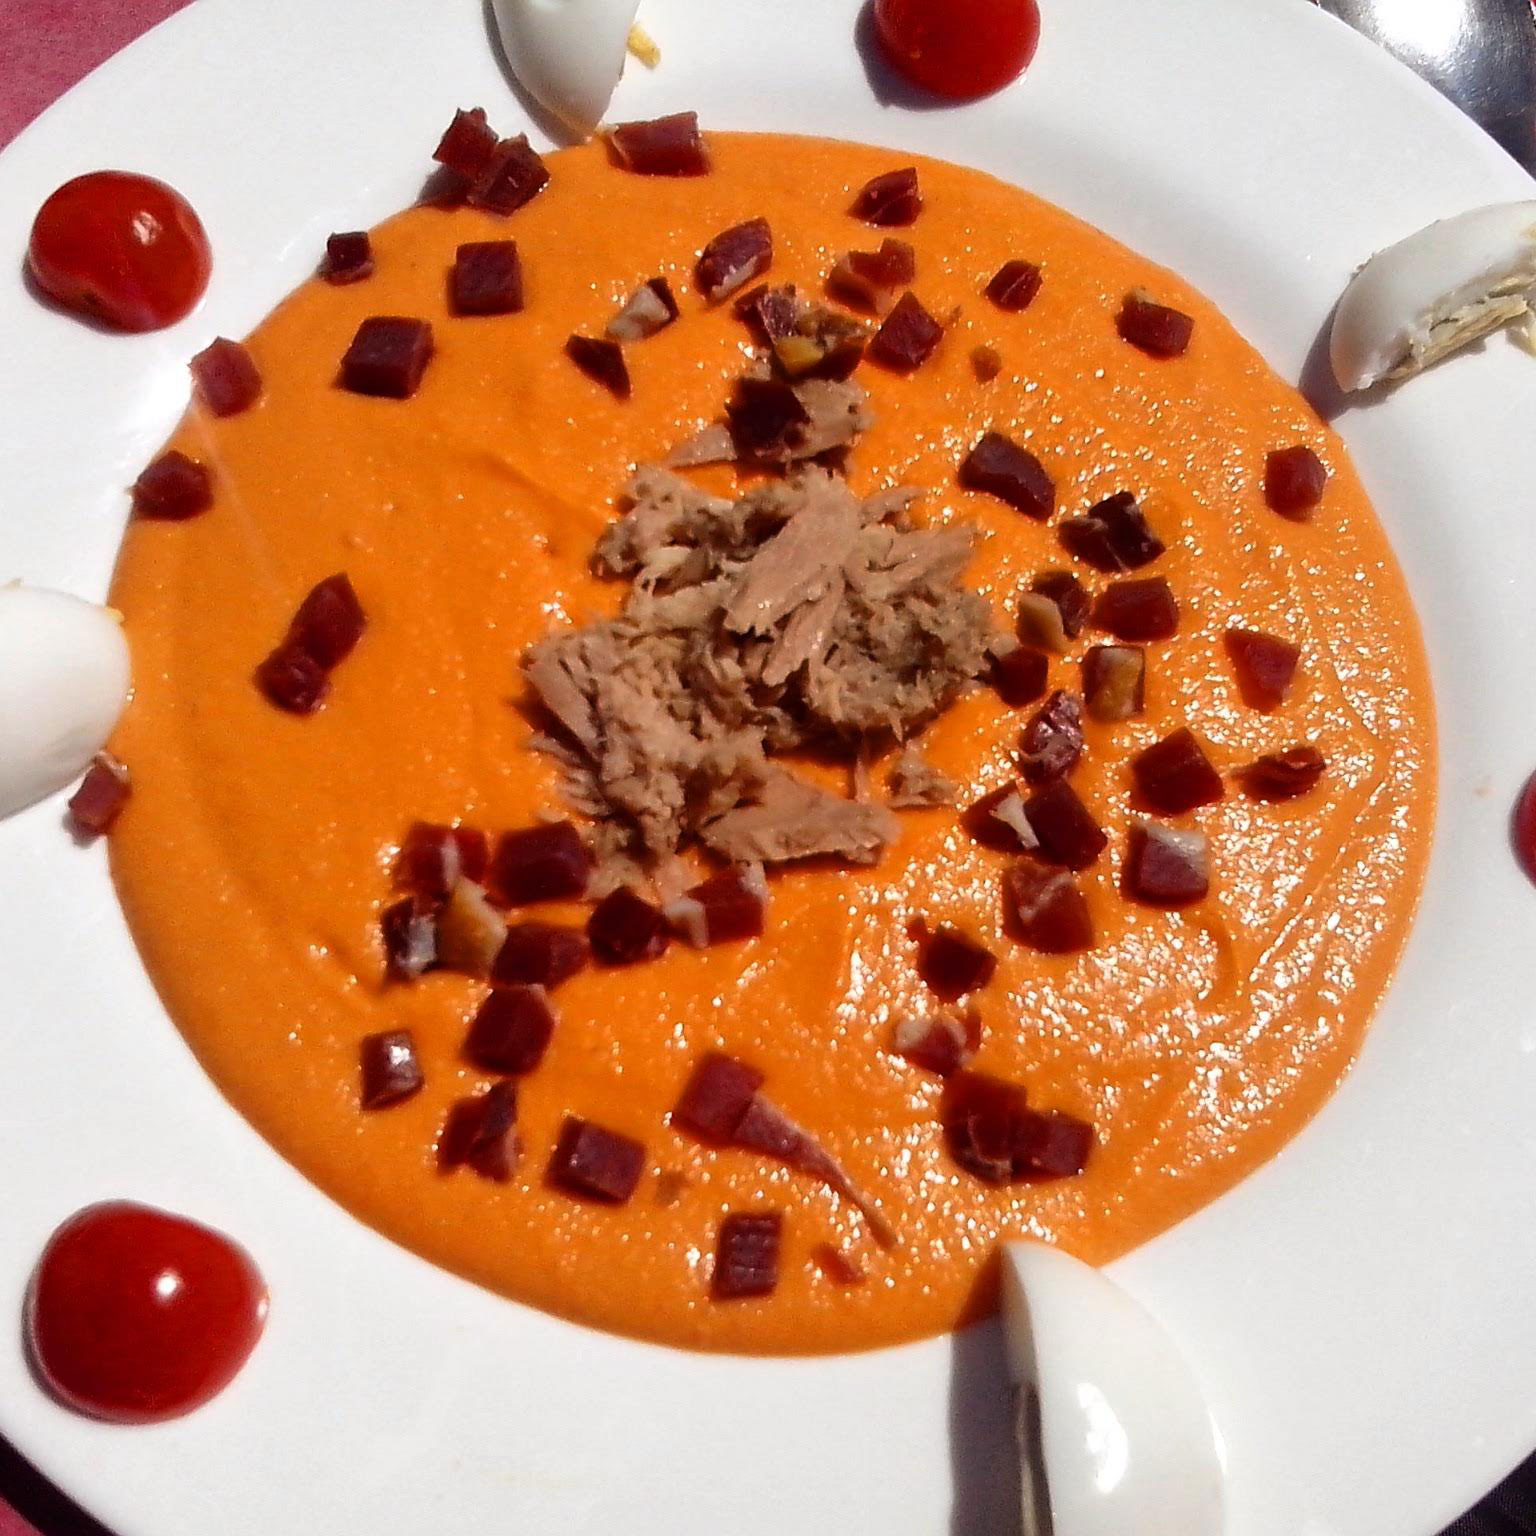 Cold Soup Variations on Spain's famous food Gazpacho